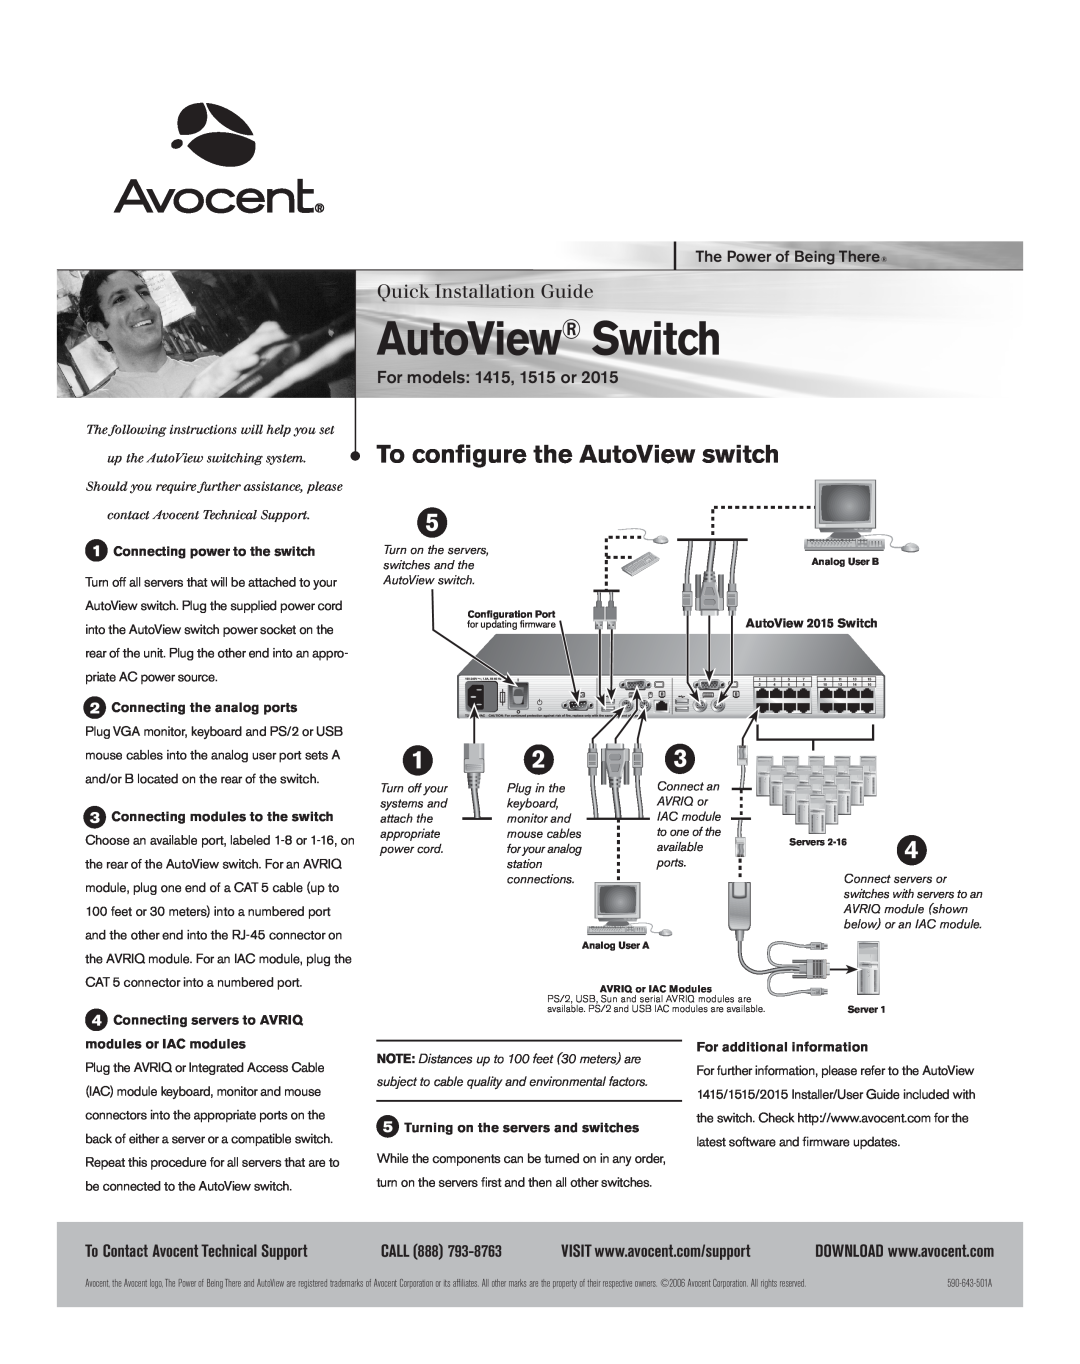 Avocent manual AutoView Switch, To configure the AutoView switch, Quick Installation Guide, For models 1415, 1515 or 